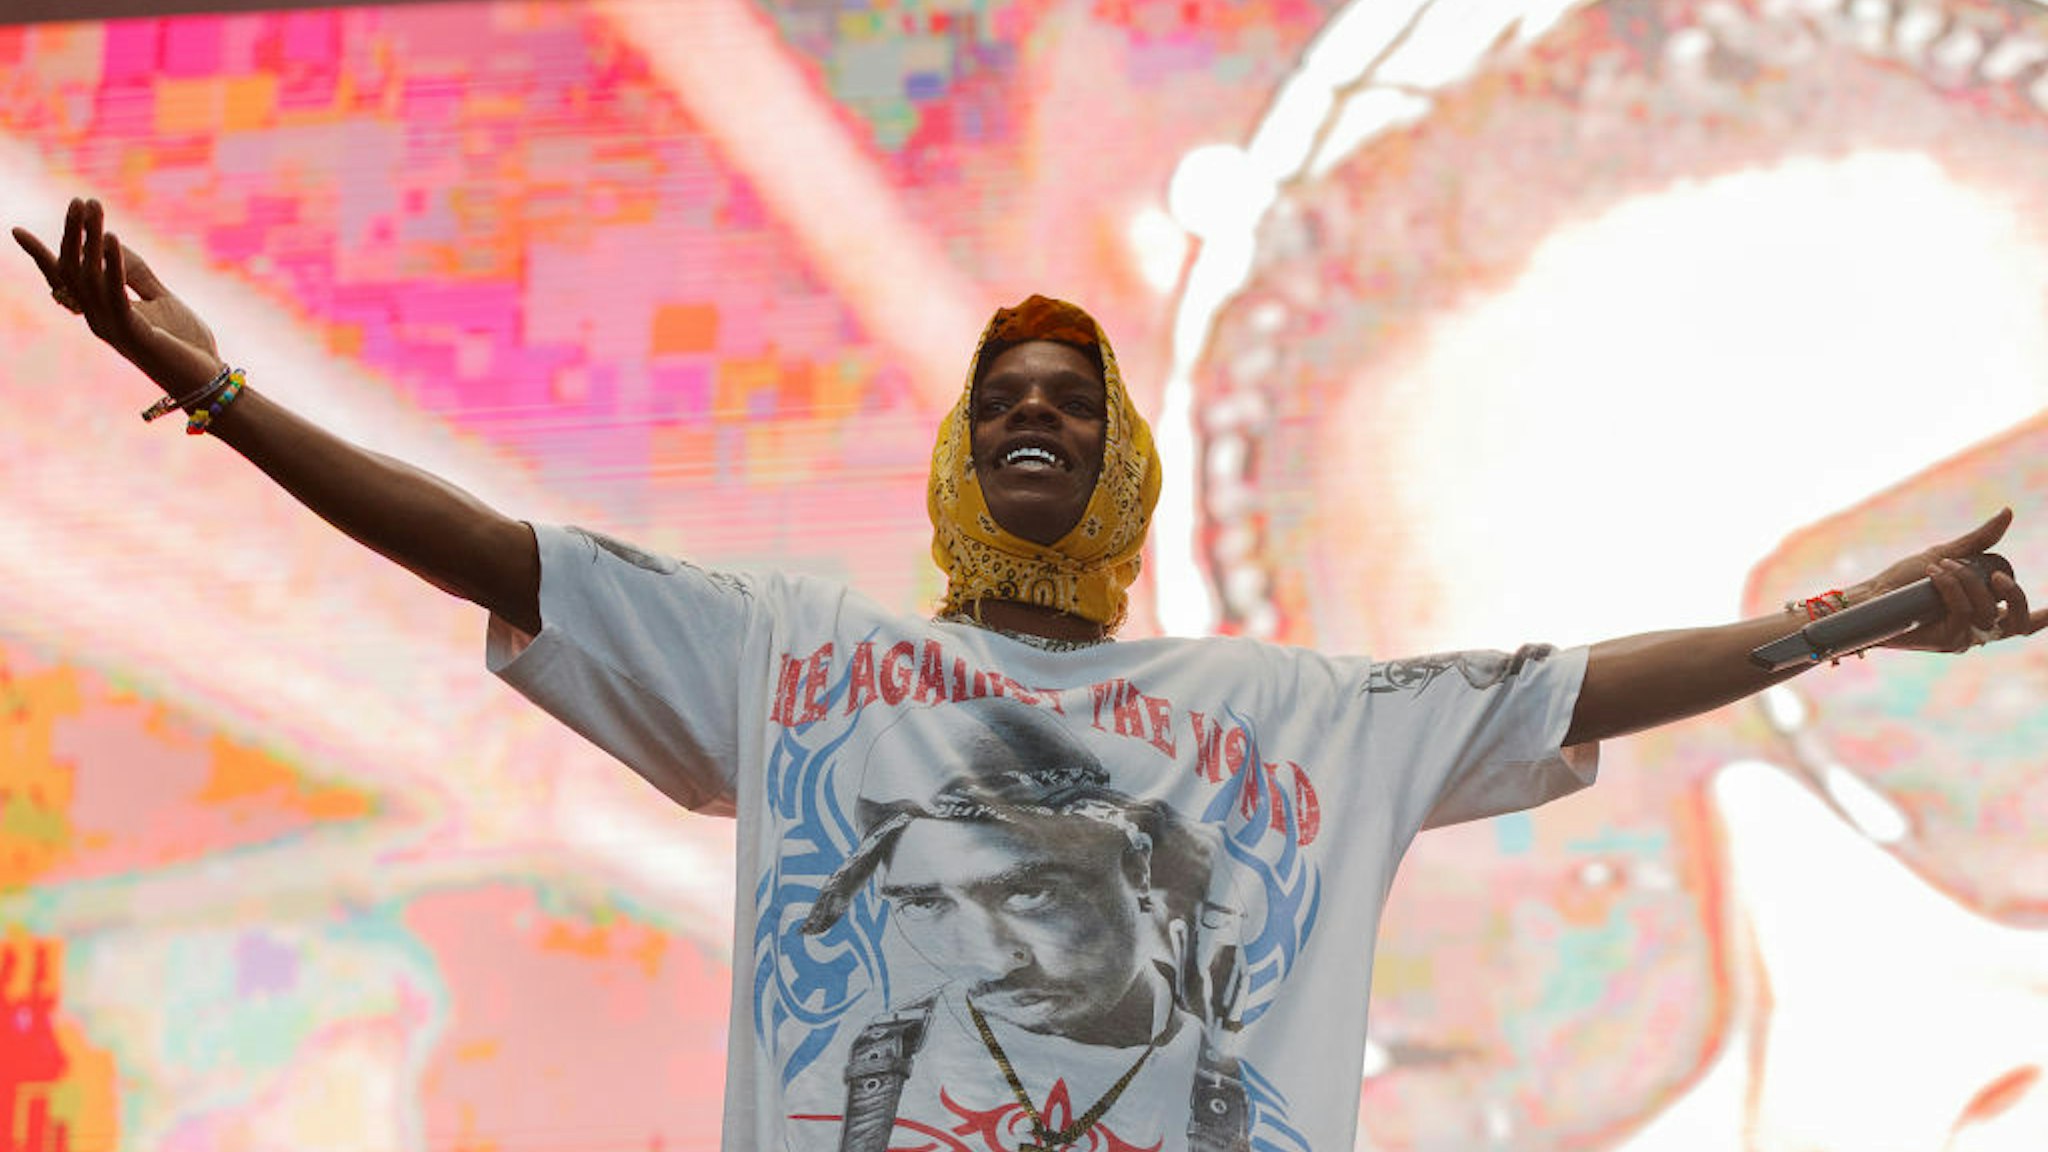 Rapper A$AP Rocky performs onstage during Breakout Festival 2019 at PNE Amphitheatre on June 15, 2019 in Vancouver, Canada.